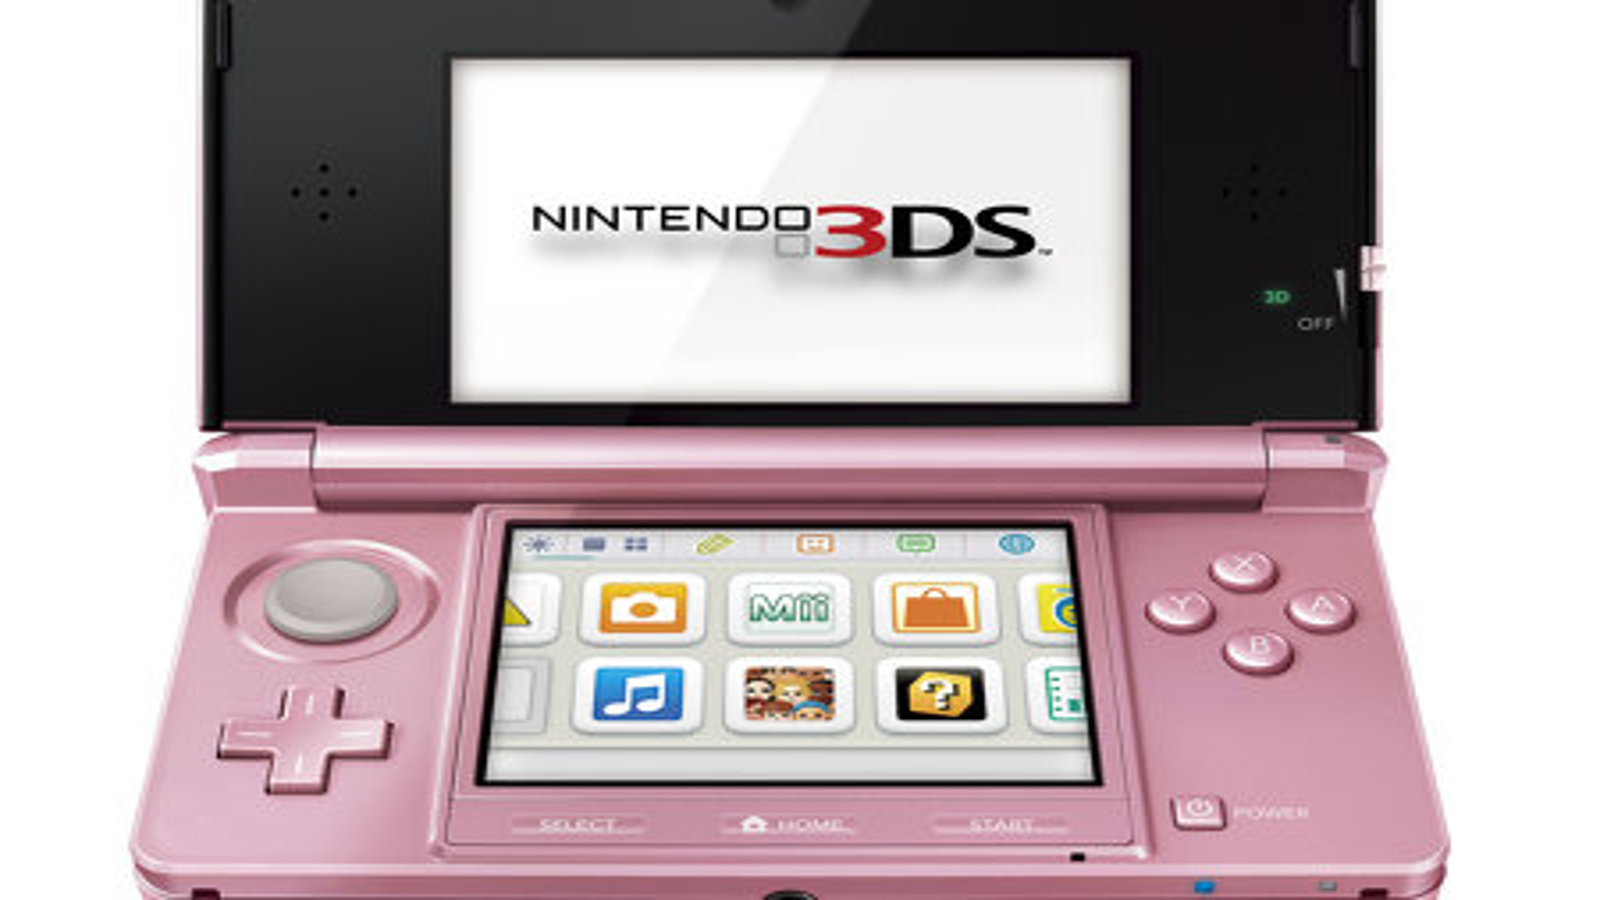 Ice White, Coral Pink 3DS | Eurogamer.net